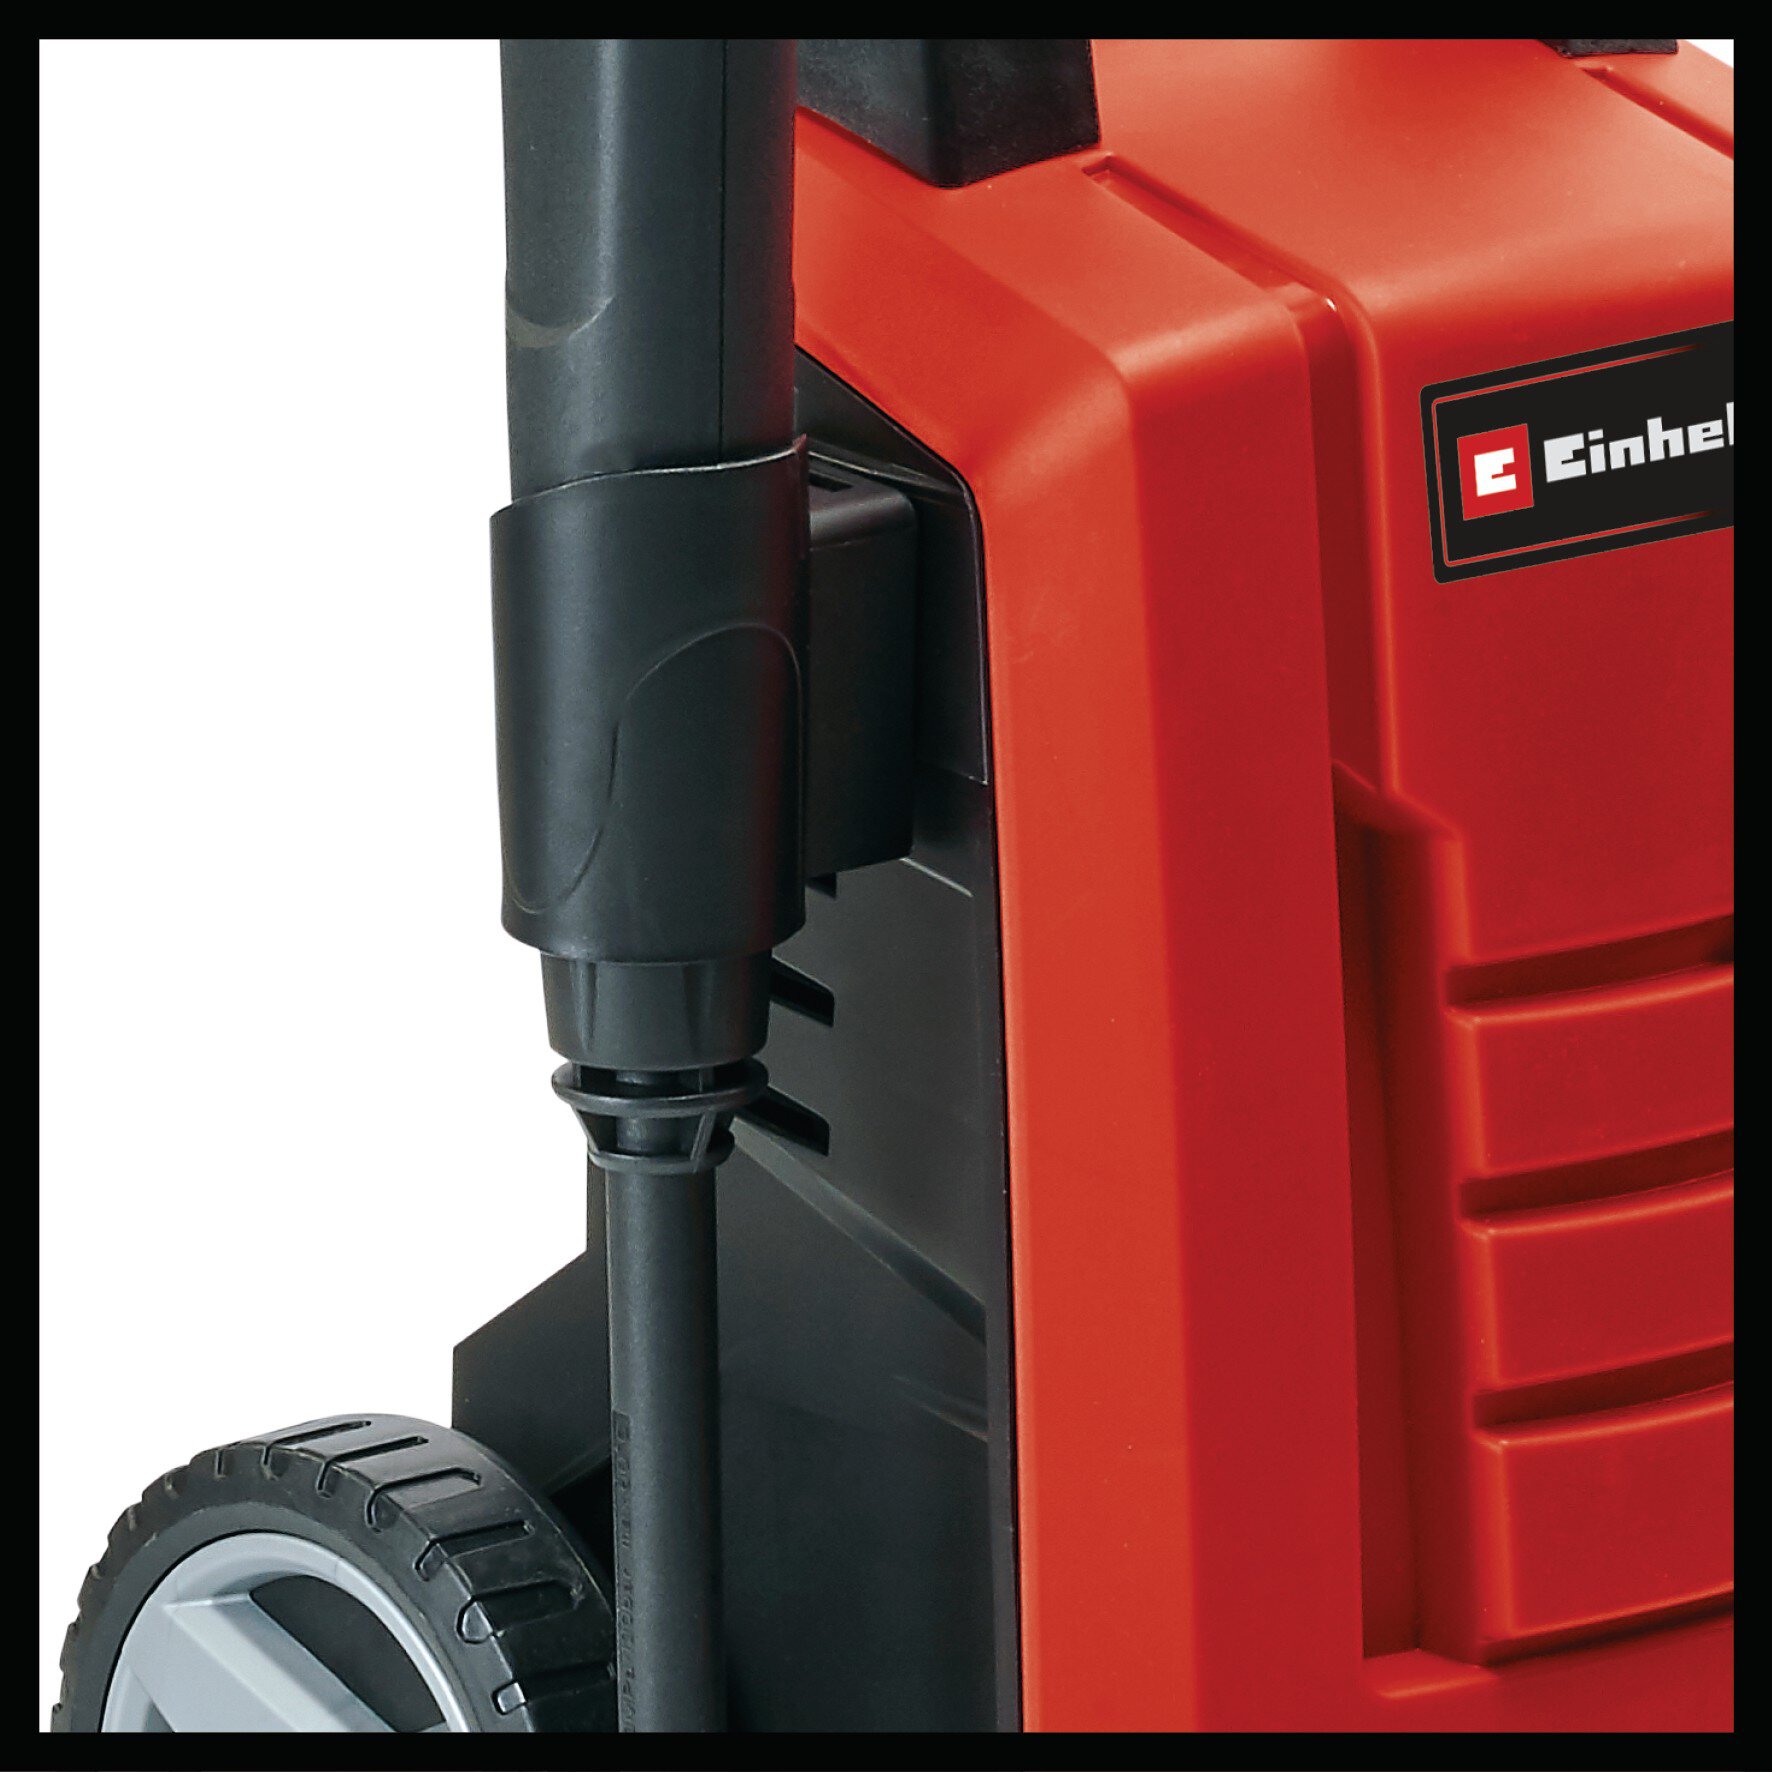 einhell-classic-high-pressure-cleaner-4140750-detail_image-103